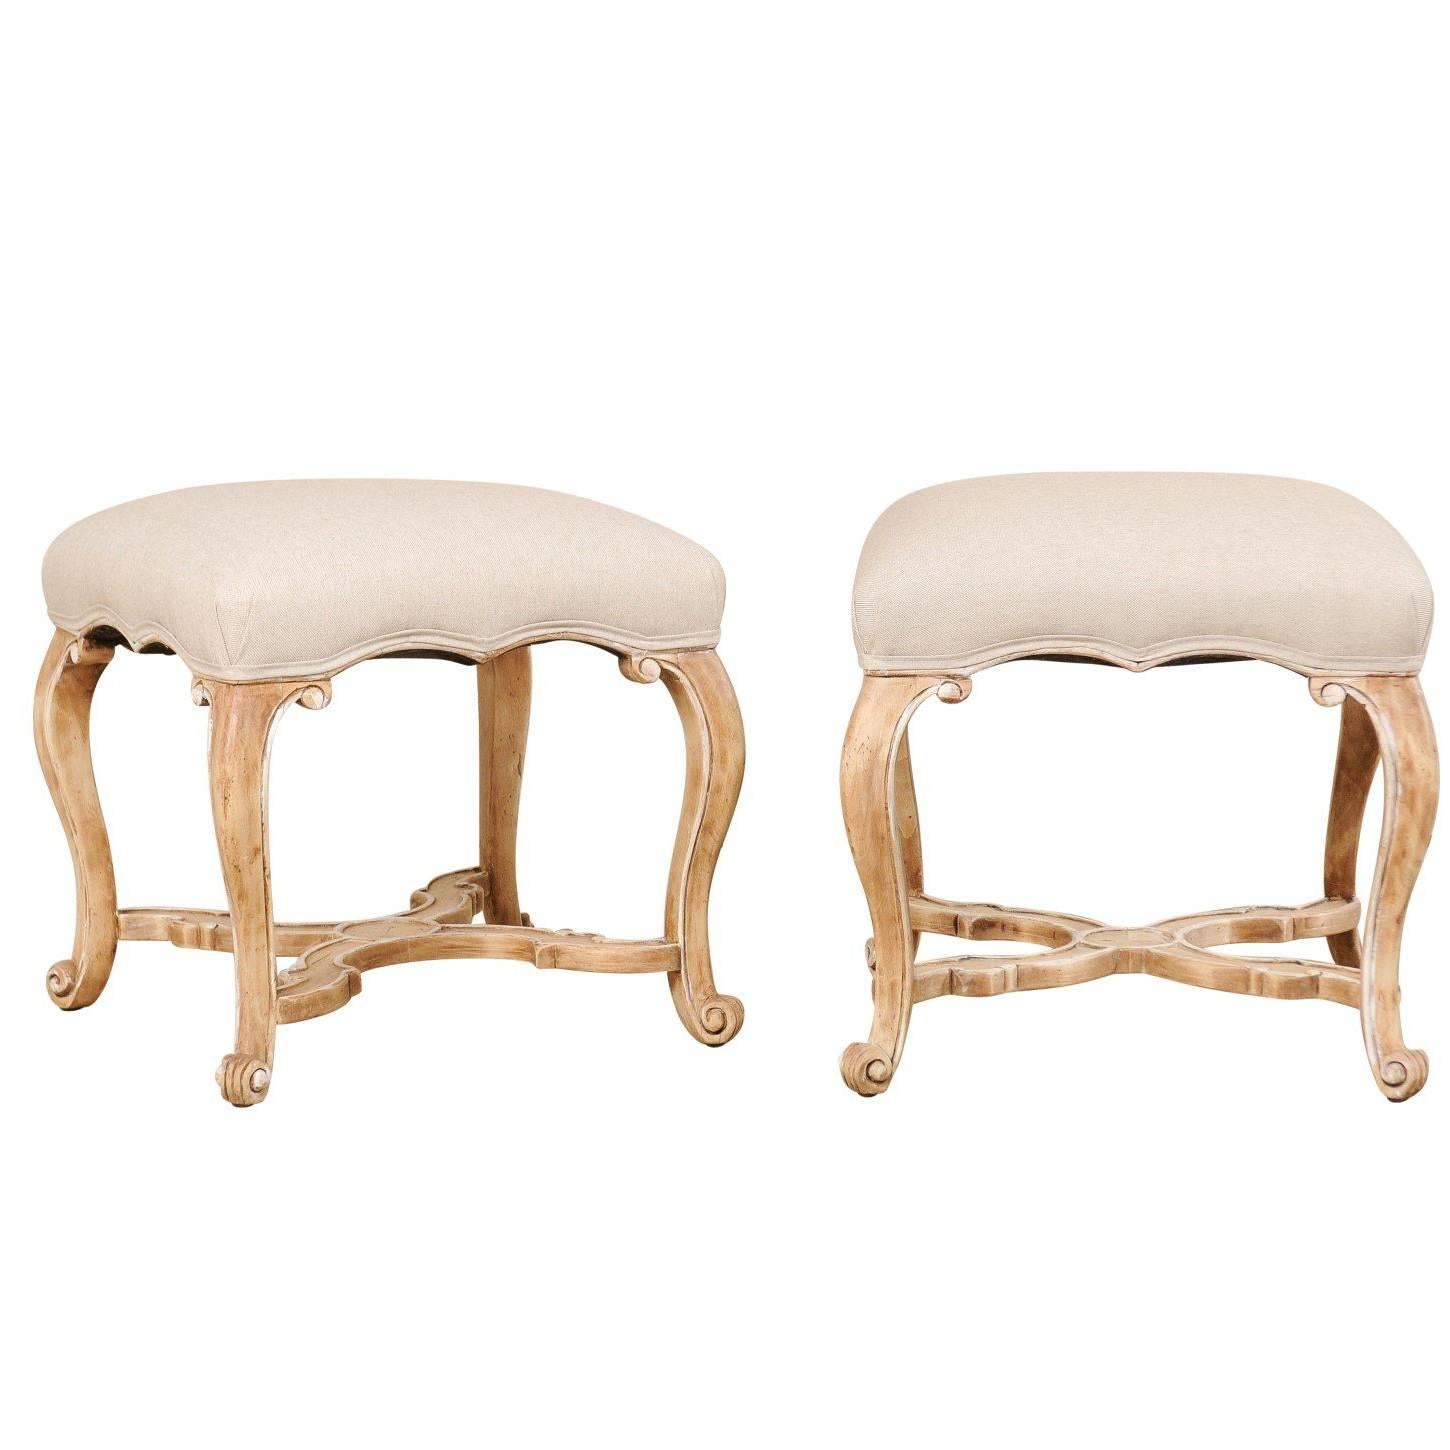 Pair of Carved Wood and Upholstered Stools with Cabriole Legs by Minton-Spidell